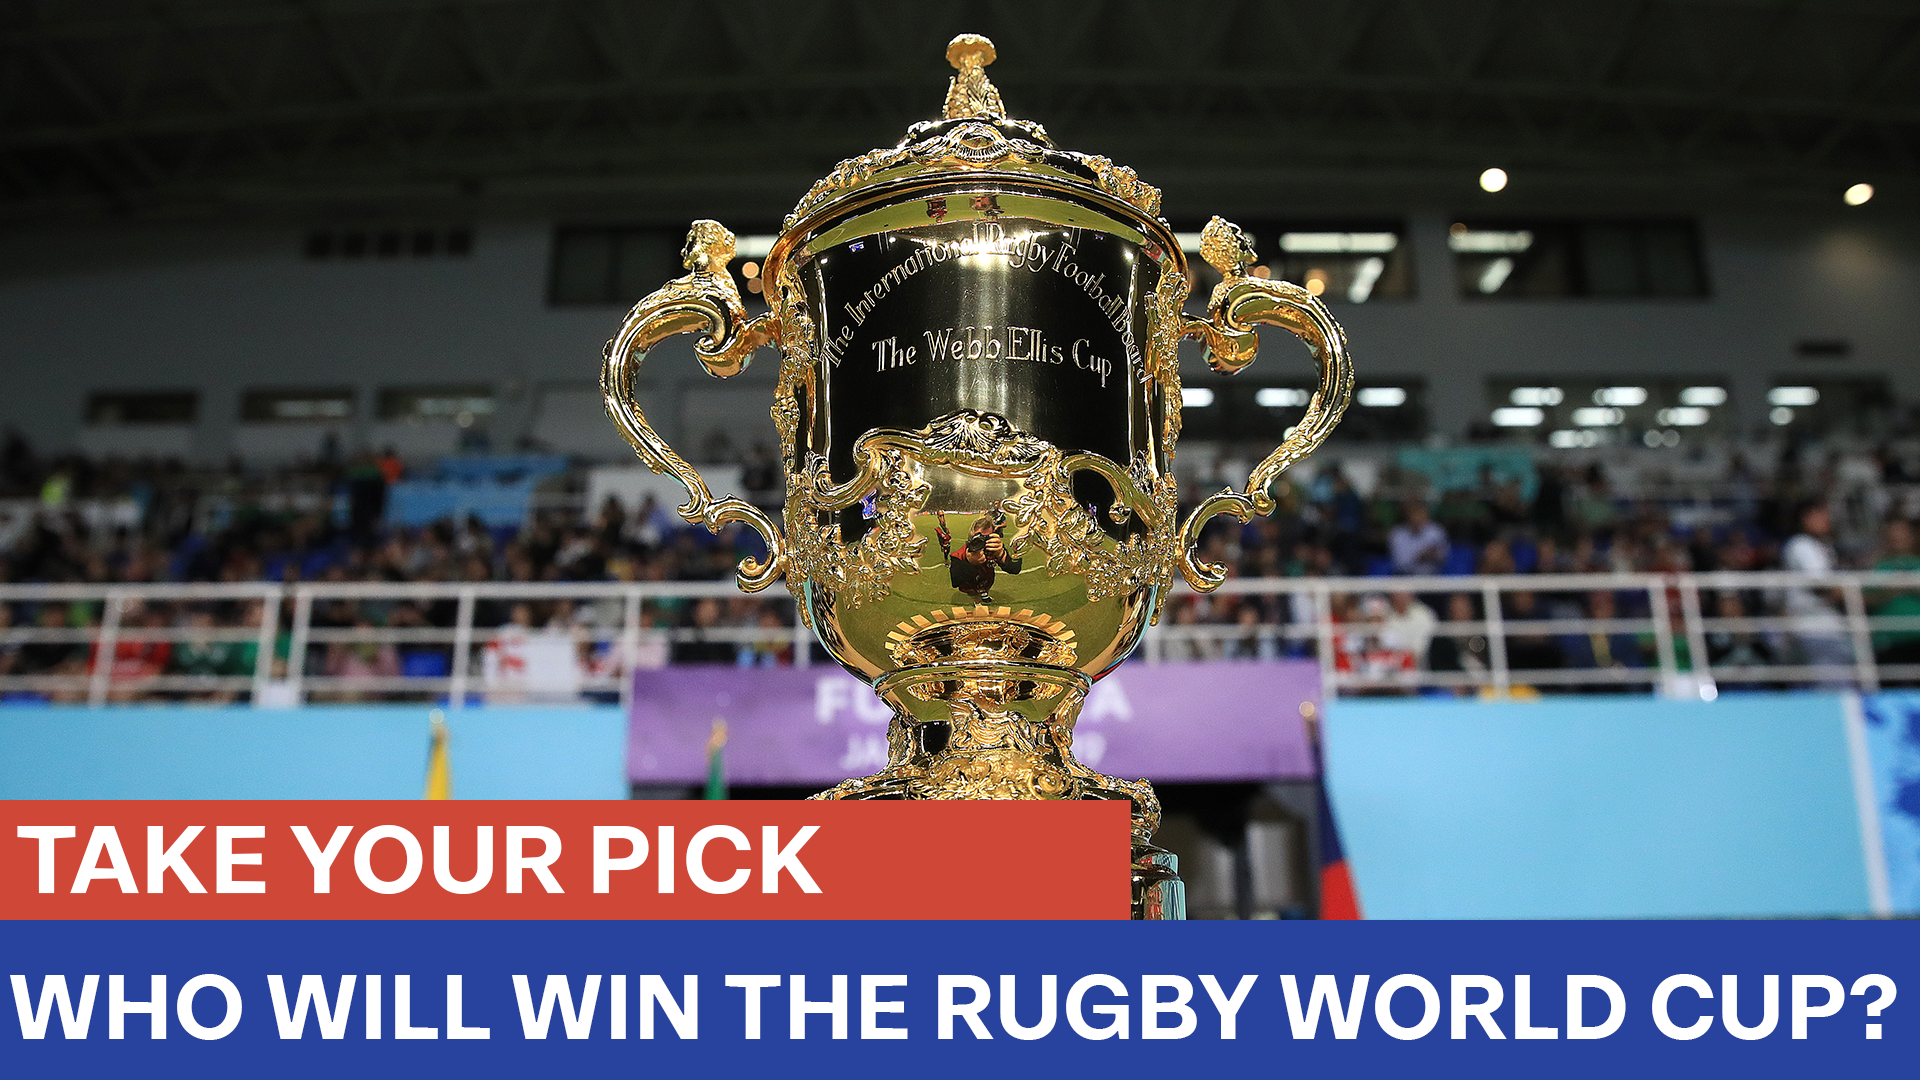 The Rugby World Cup live on ITV